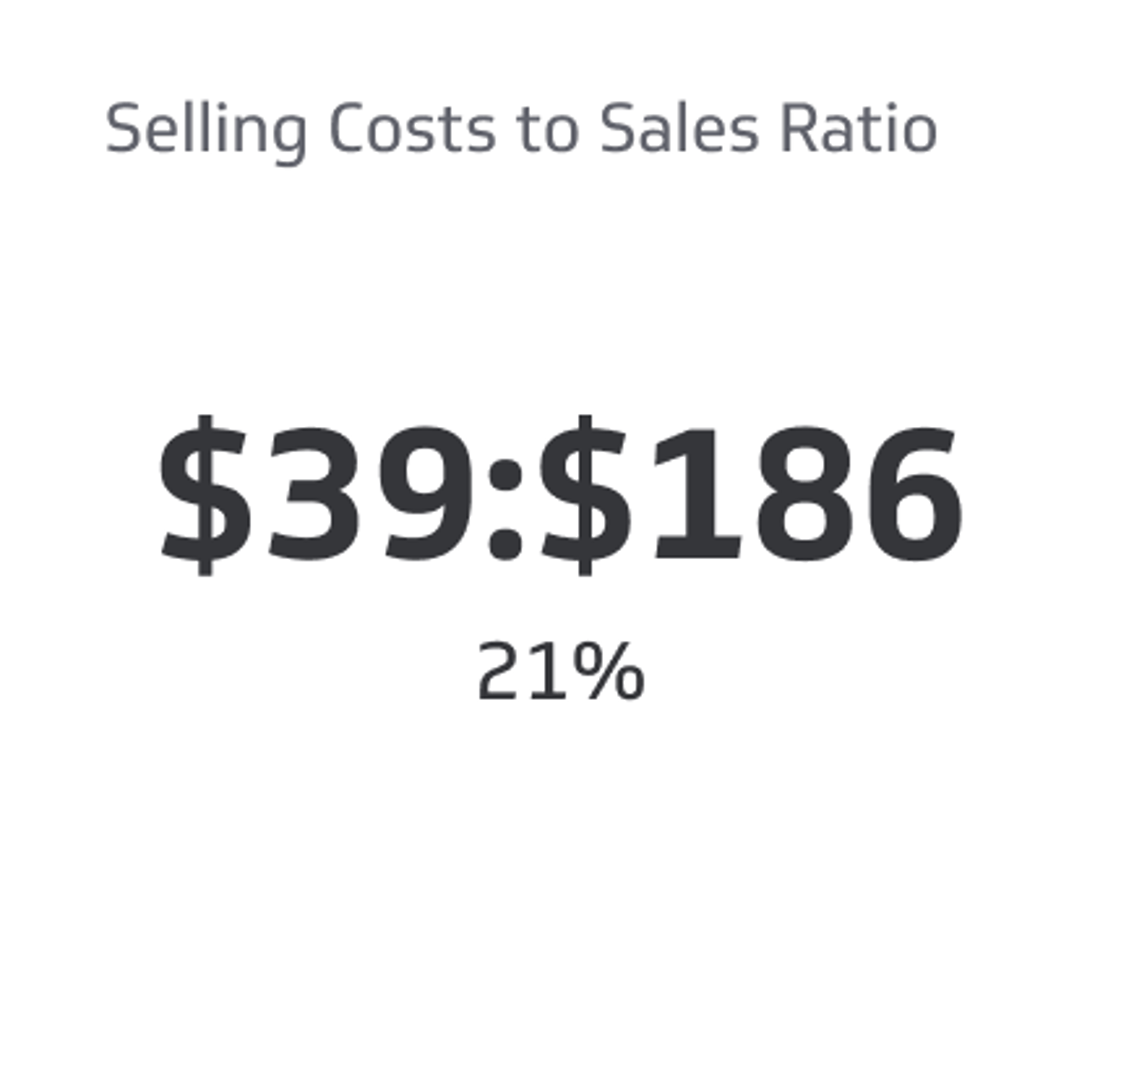 Related KPI Examples - Selling Costs to Sales Ratio Metric